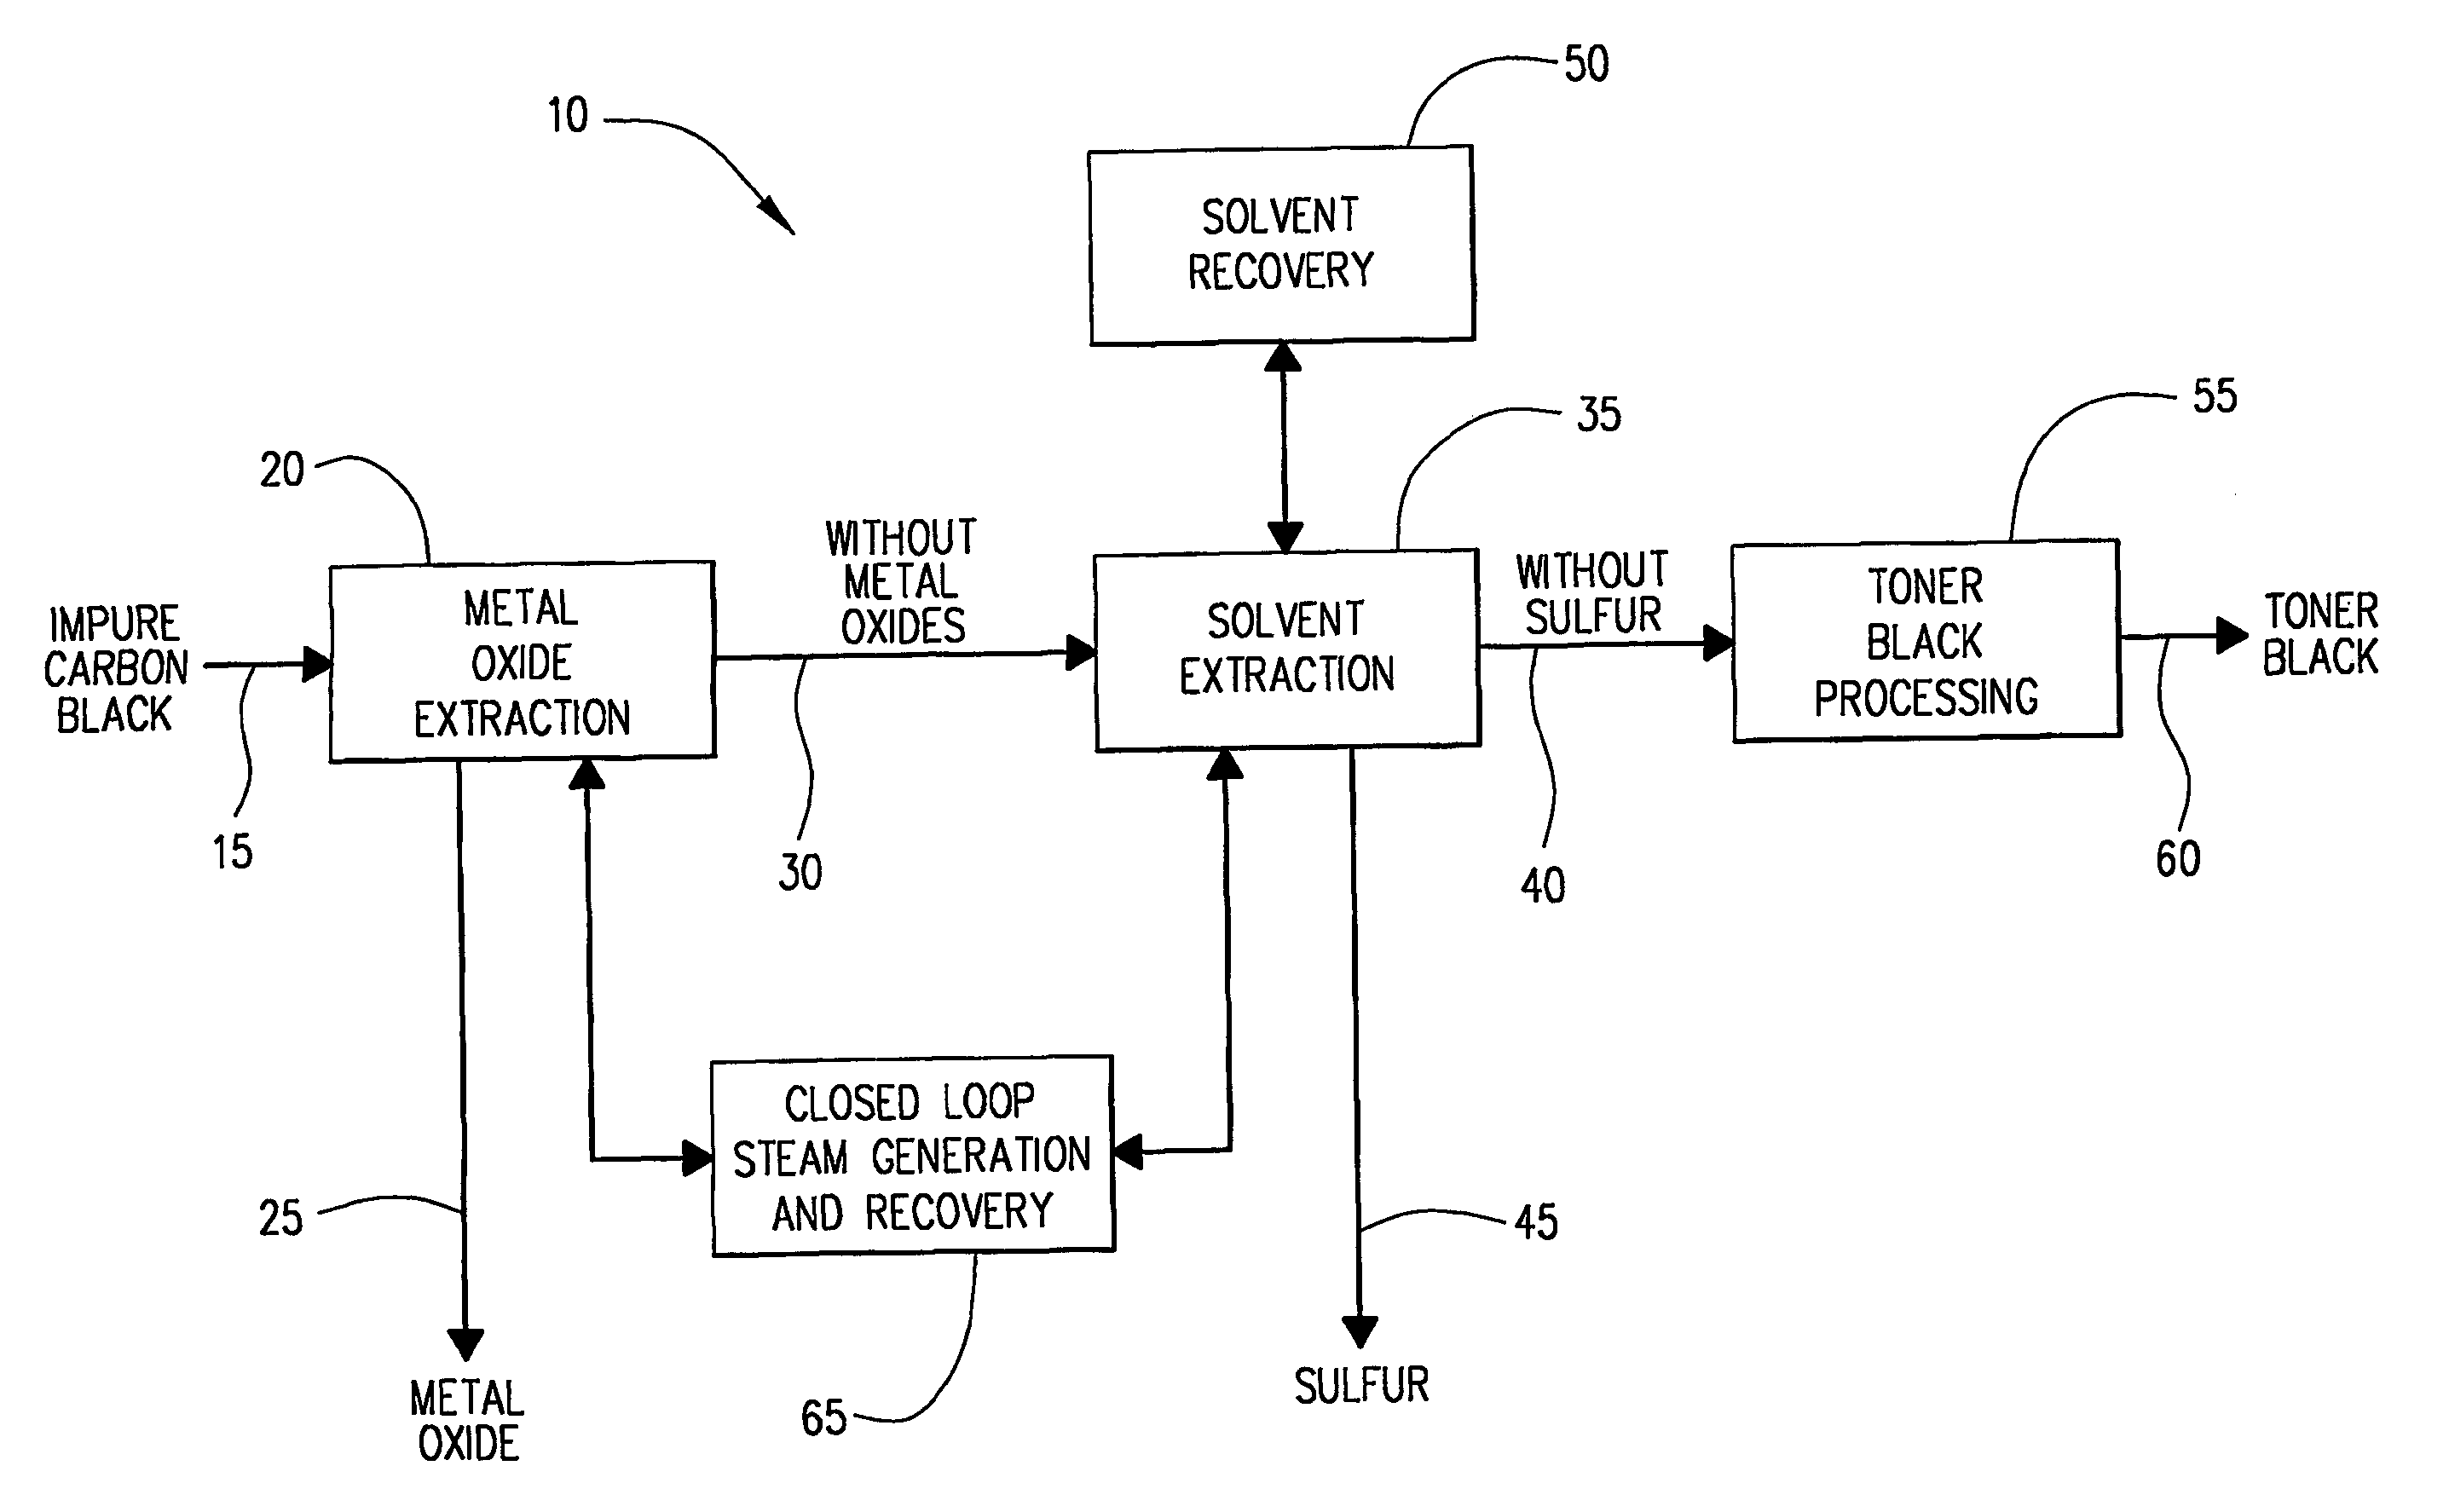 Apparatus and method for recovering carbon black from pyrolysis byproducts